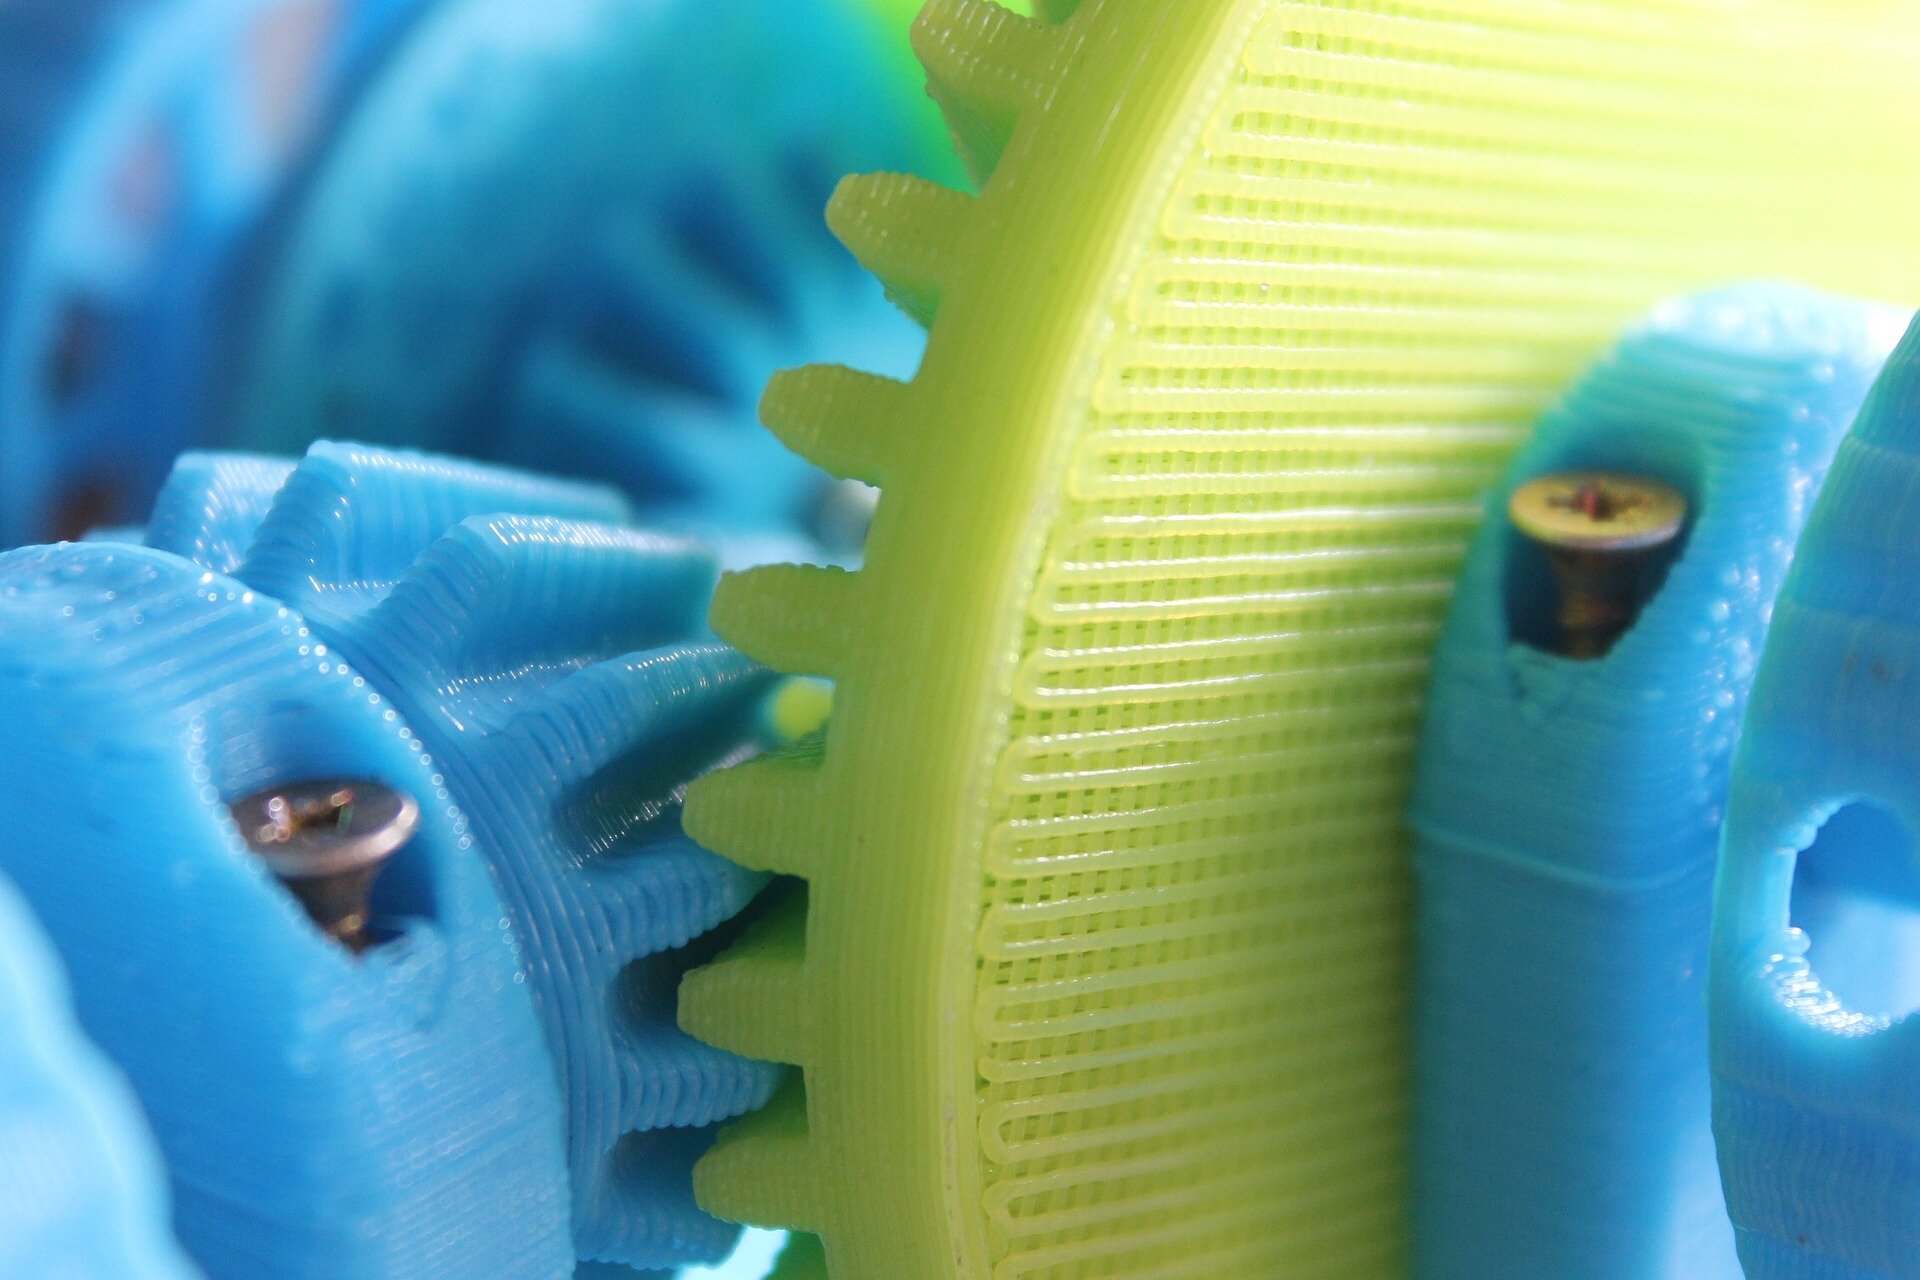 #Smarter 3D printing makes better parts faster